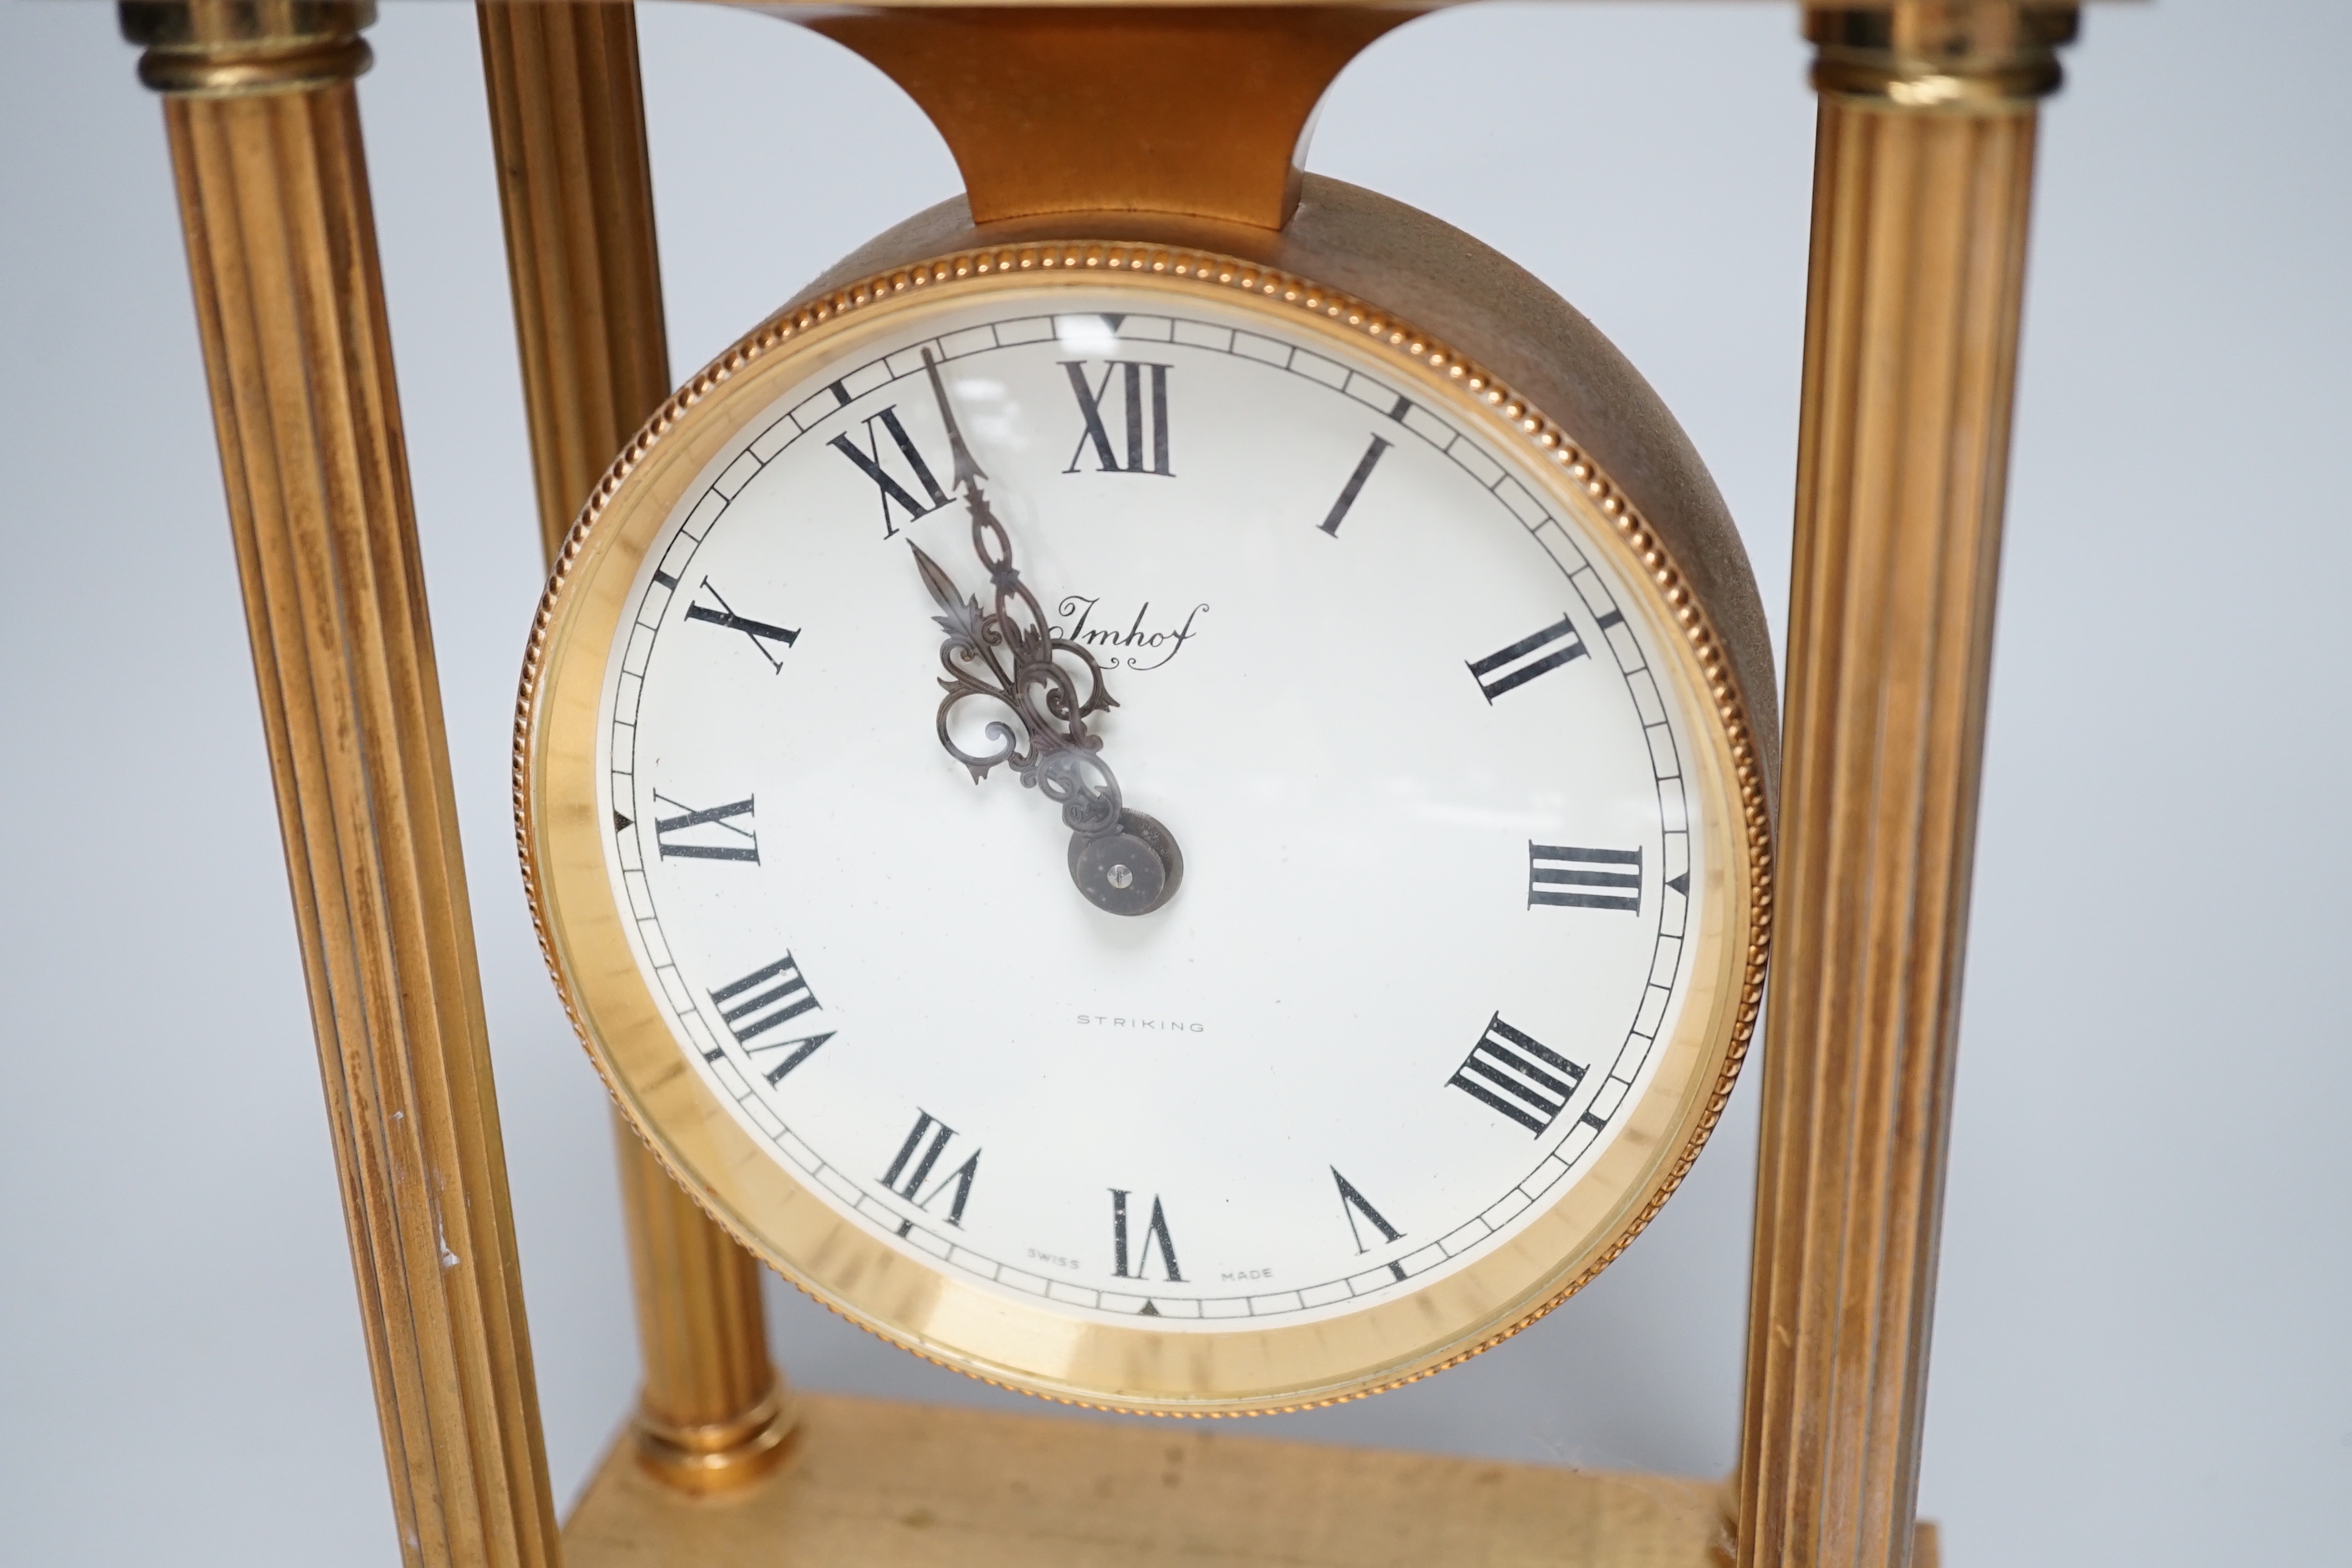 Imhof Swiss brass mantel clock with two train movement, striking on a bell, 24cm high